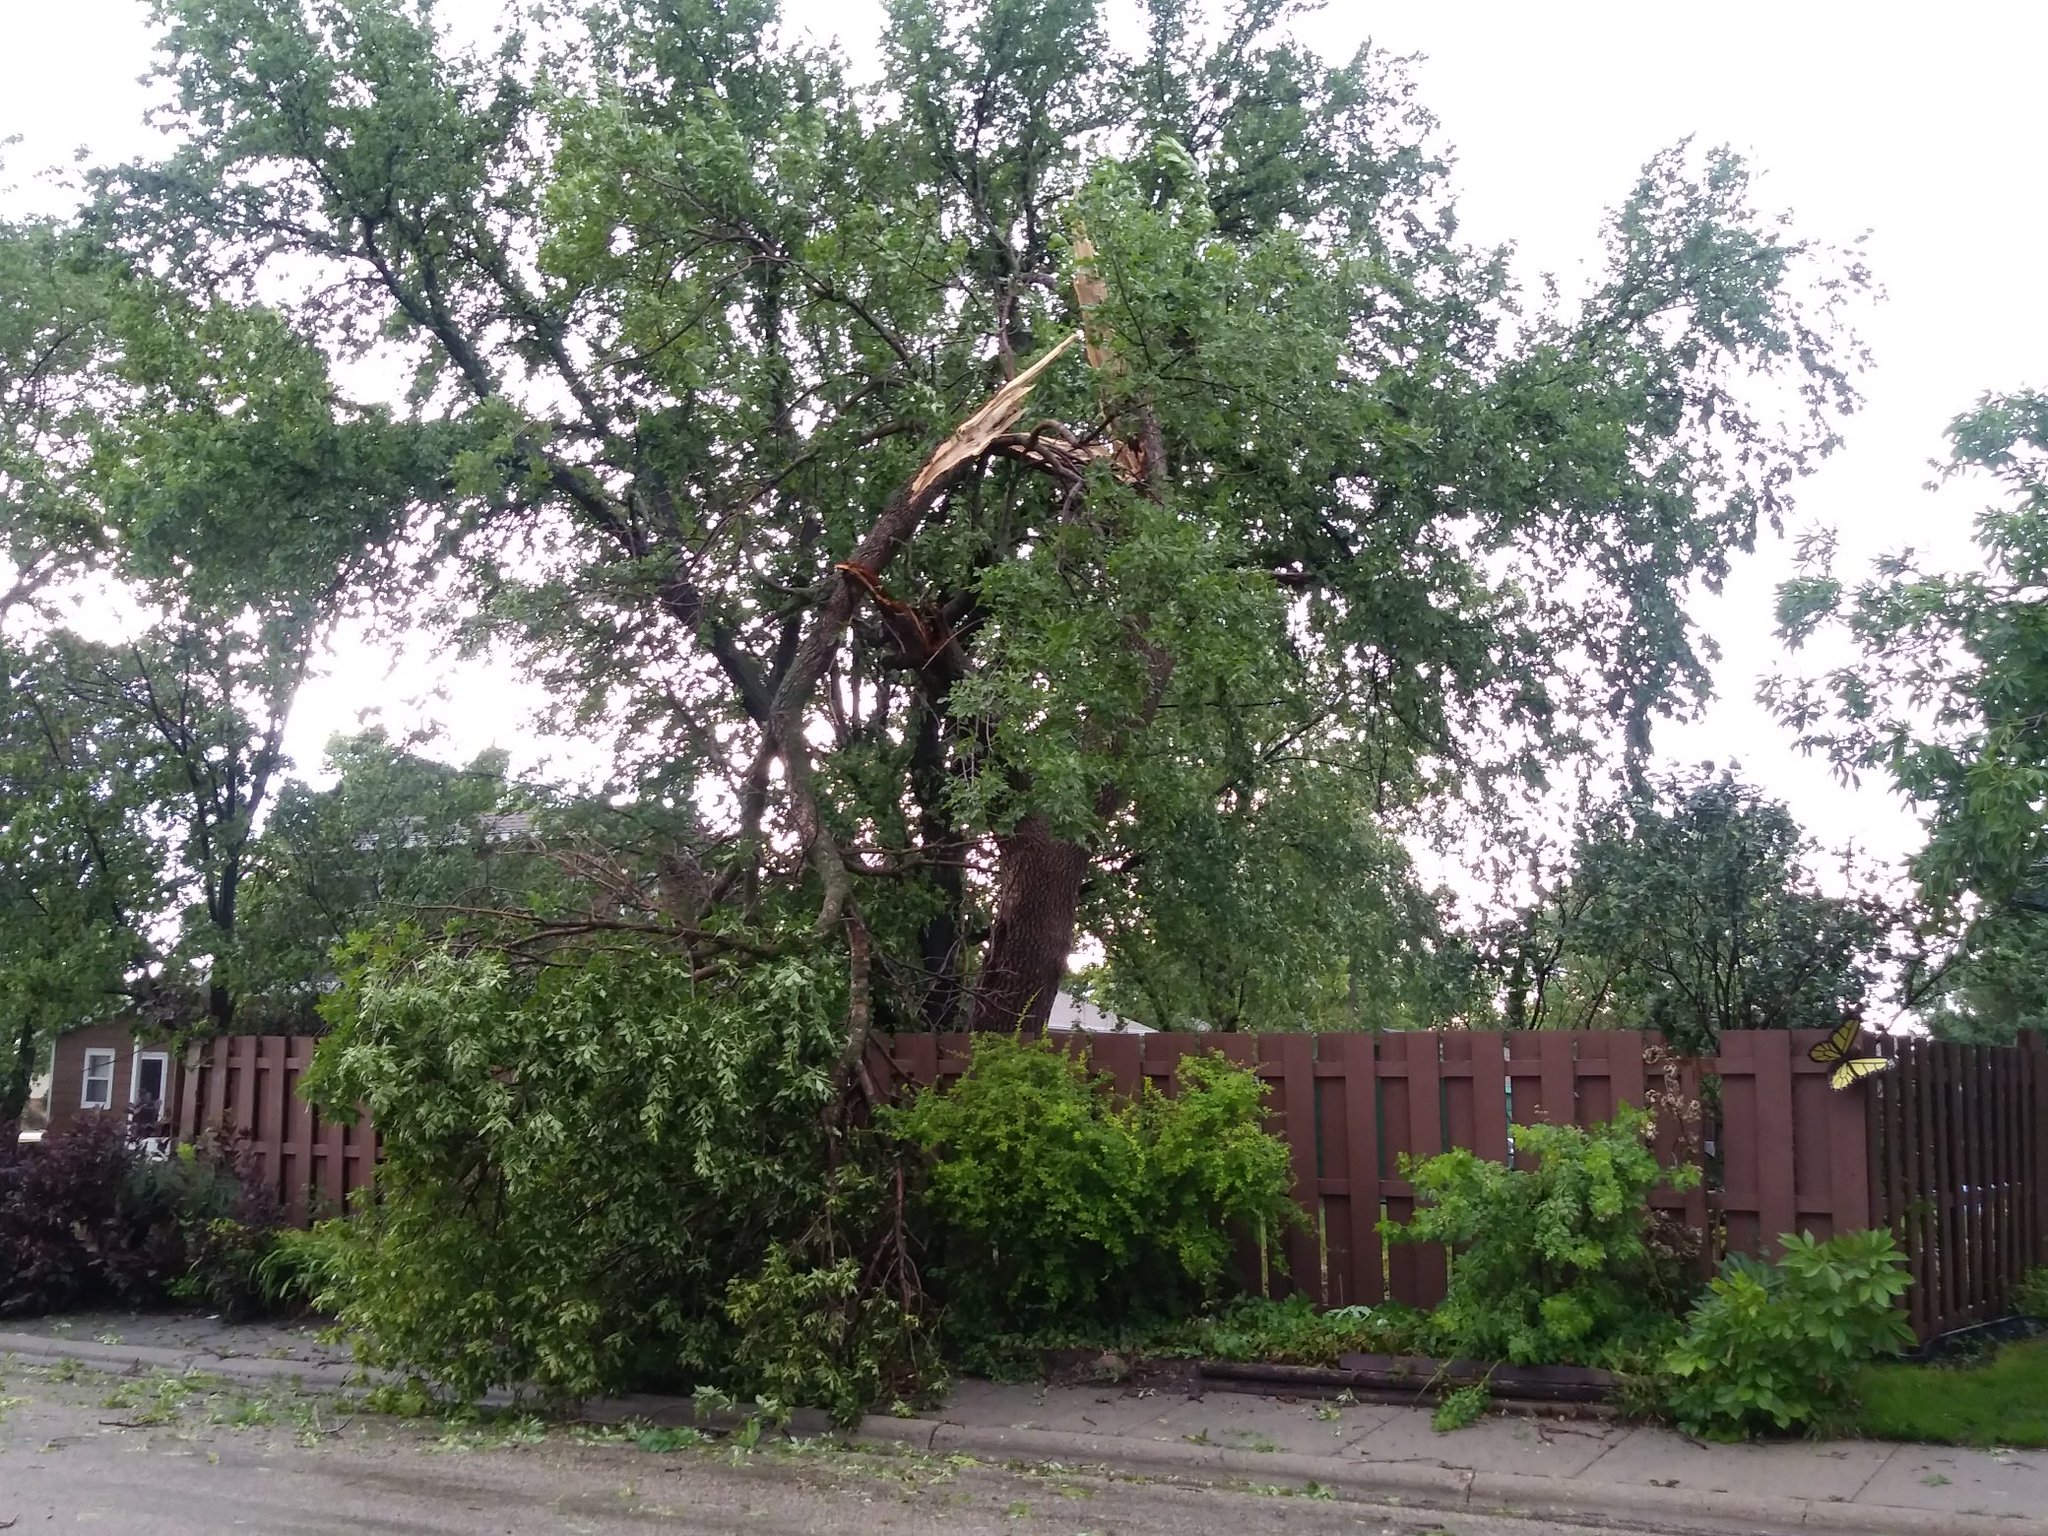 Tree damage in Miller, SD - Photo from KCCR Radio